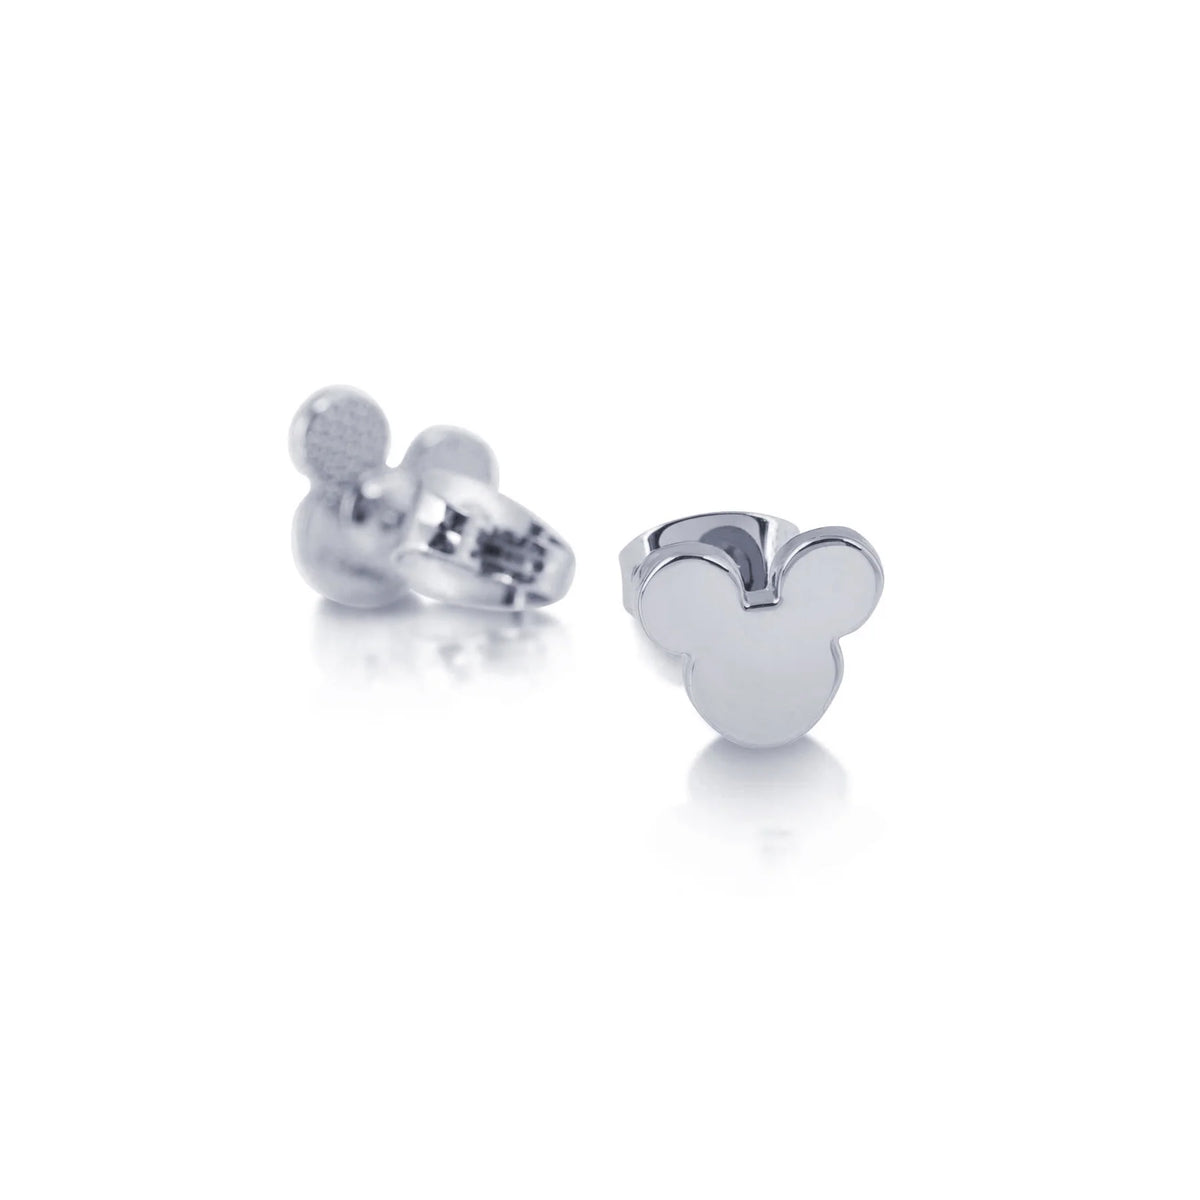 Disney Mickey Mouse Stud Earrings - White Gold